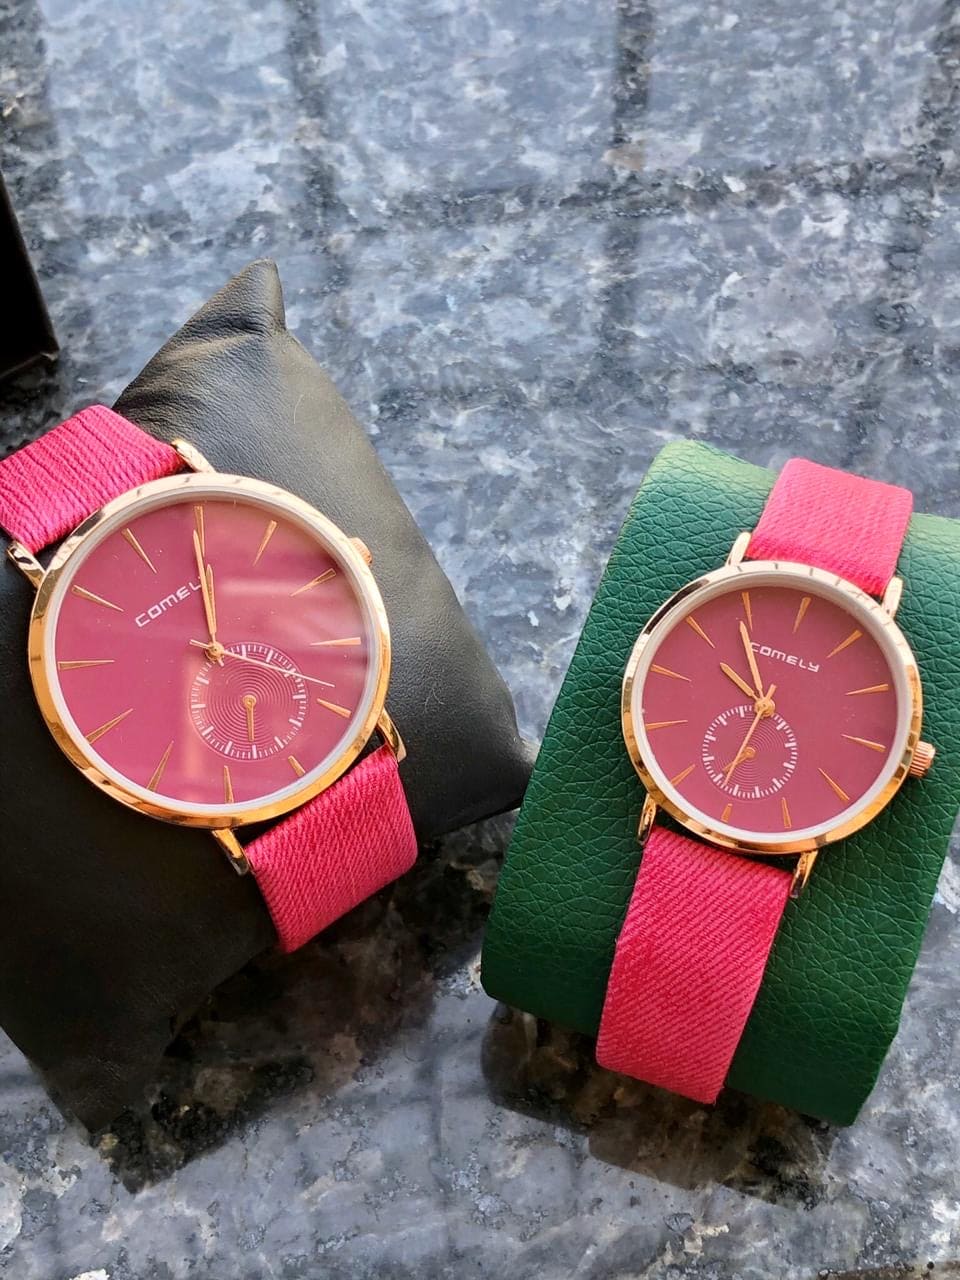 Couple Pair Quartz Watches, His and Hers Couple Wristwatches, Quartz Analog Wrist Watches for Both Men and Women